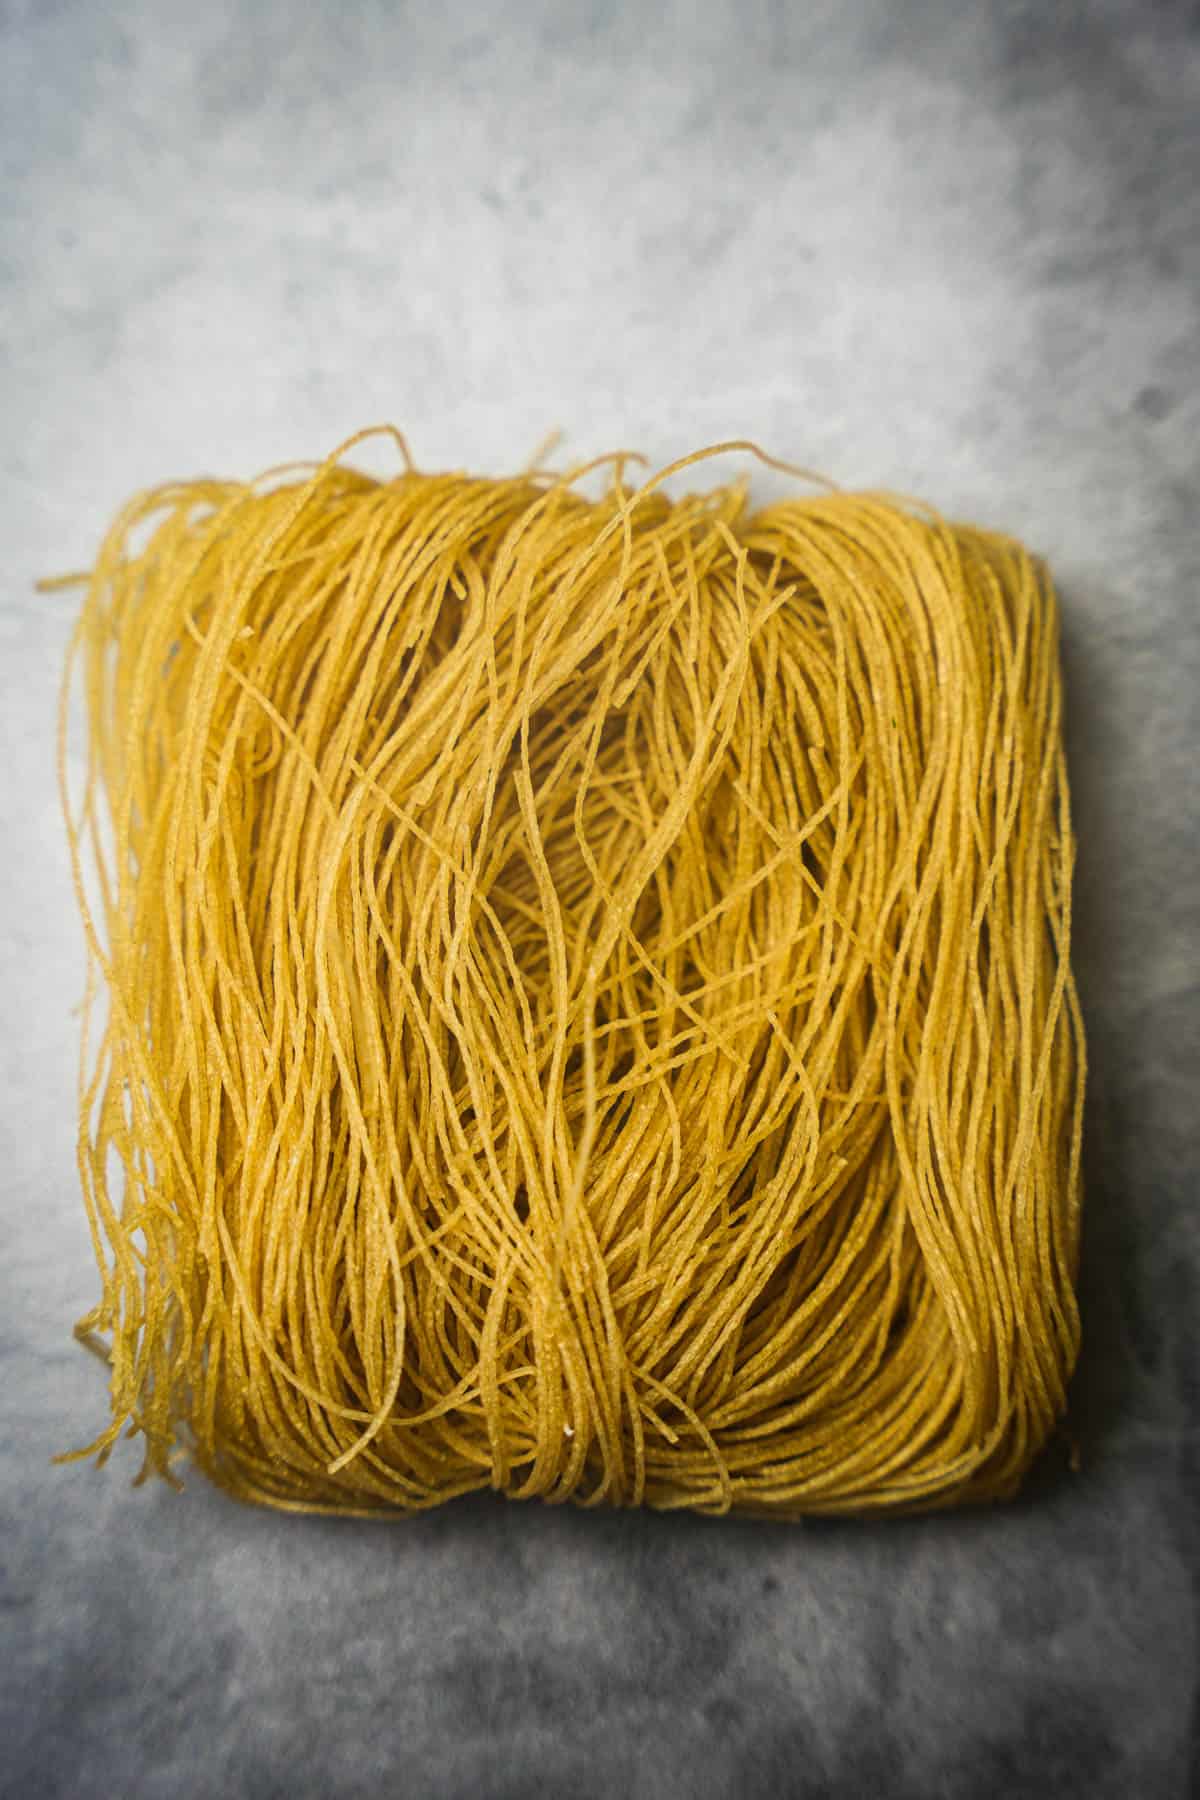 A square portion of dried gluten free vermicelli noodles.